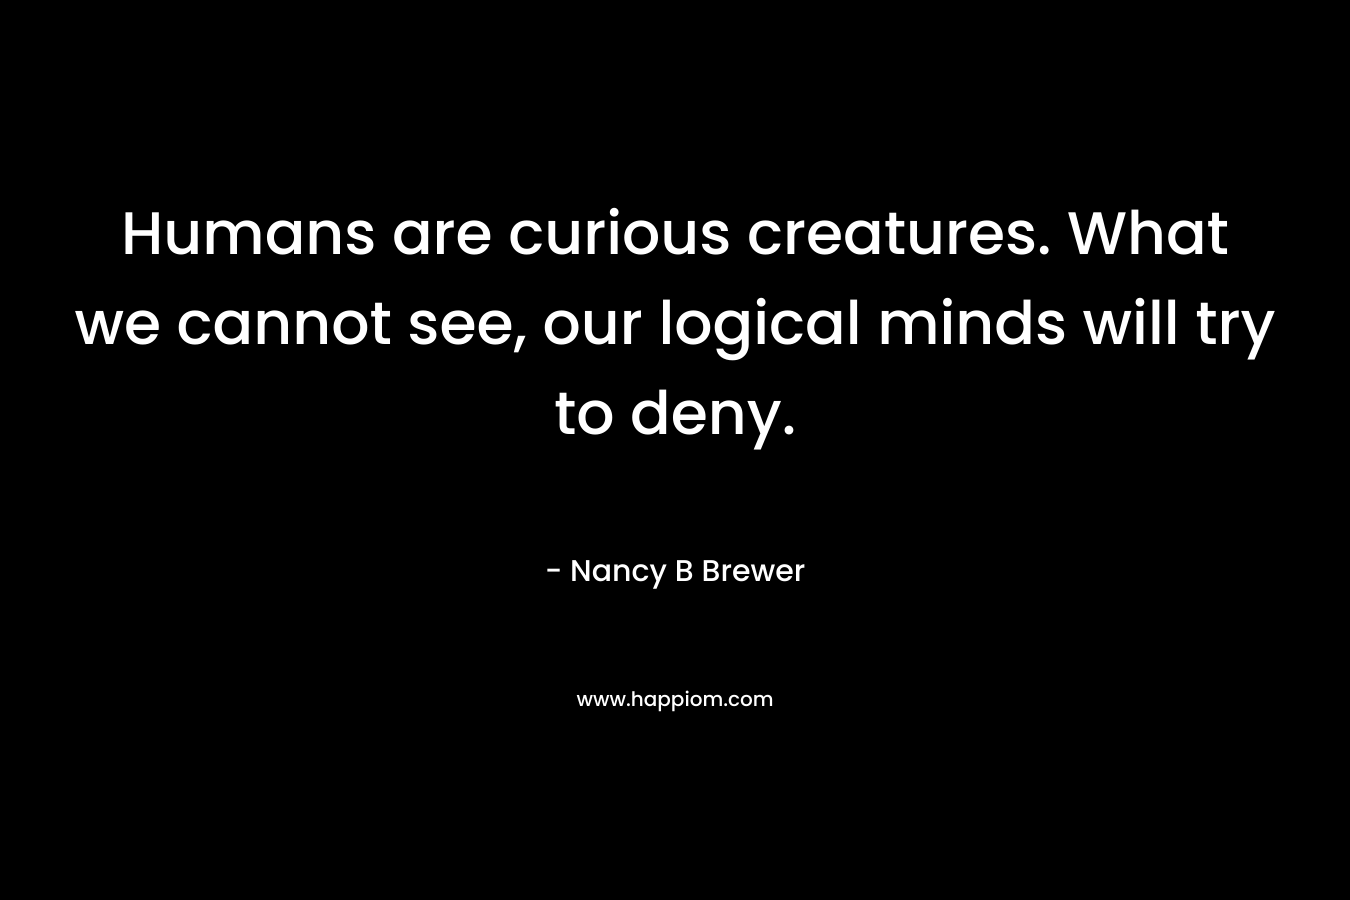 Humans are curious creatures. What we cannot see, our logical minds will try to deny.